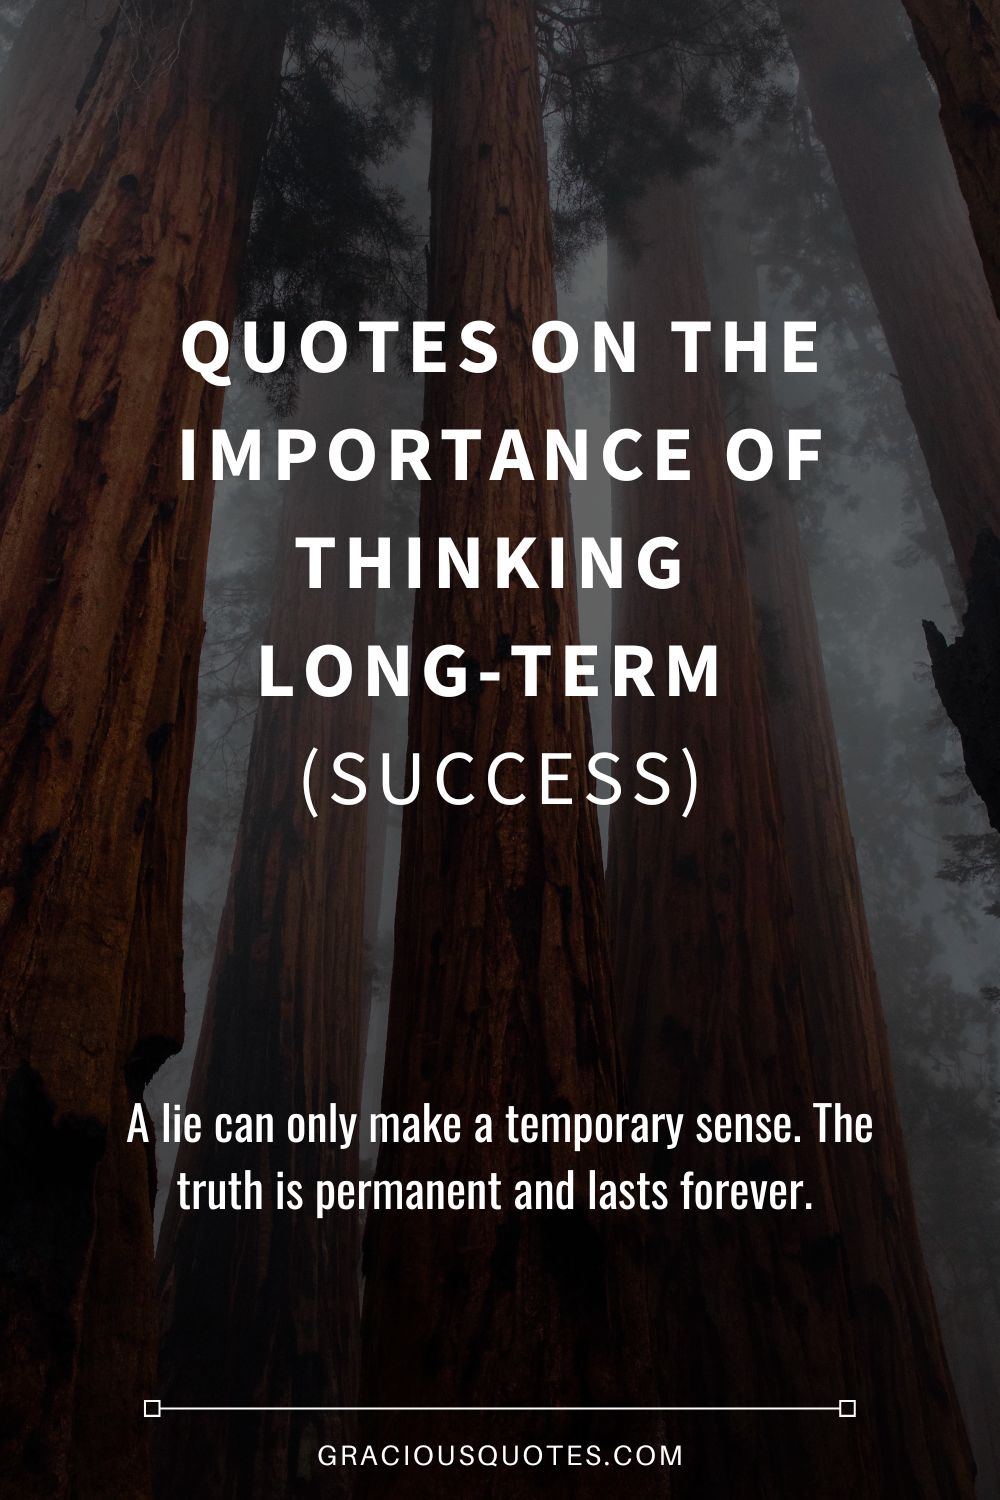 Quotes on the Importance of Thinking Long-term (SUCCESS) - Gracious Quotes